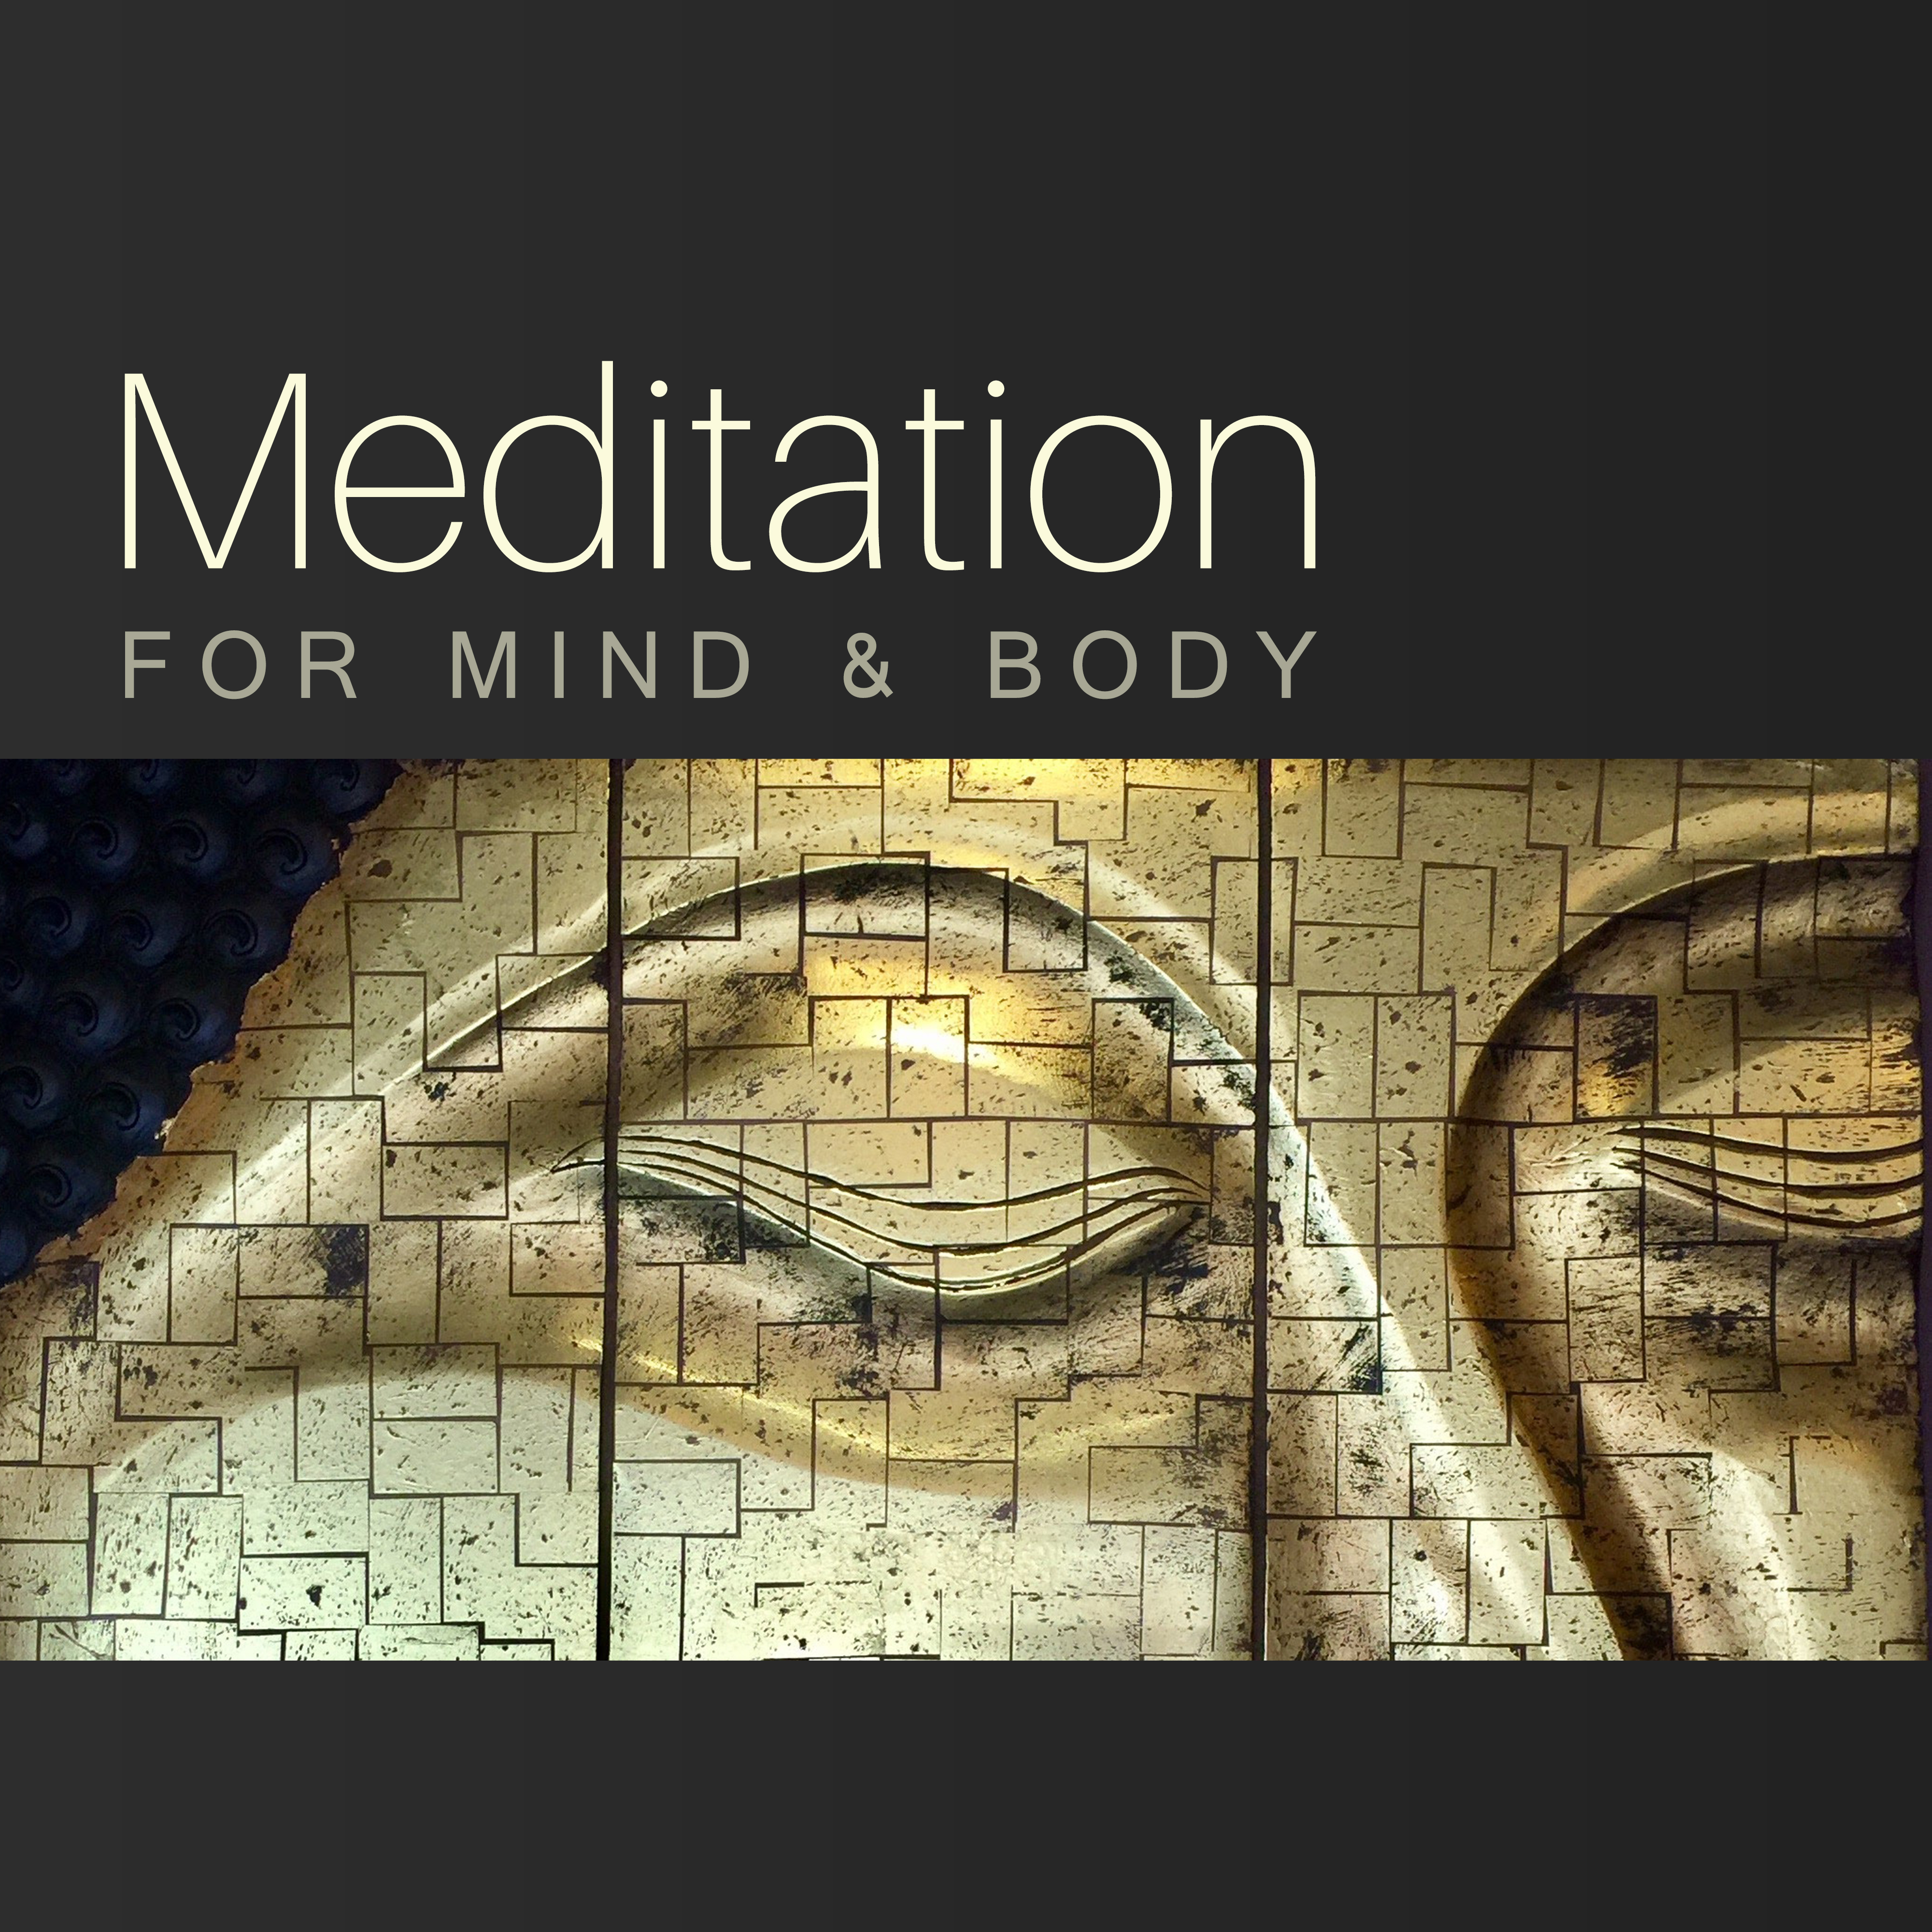 Meditation for Mind  Body  Yoga Training, Buddha Lounge, Time to Meditate, Sounds to Calm Down